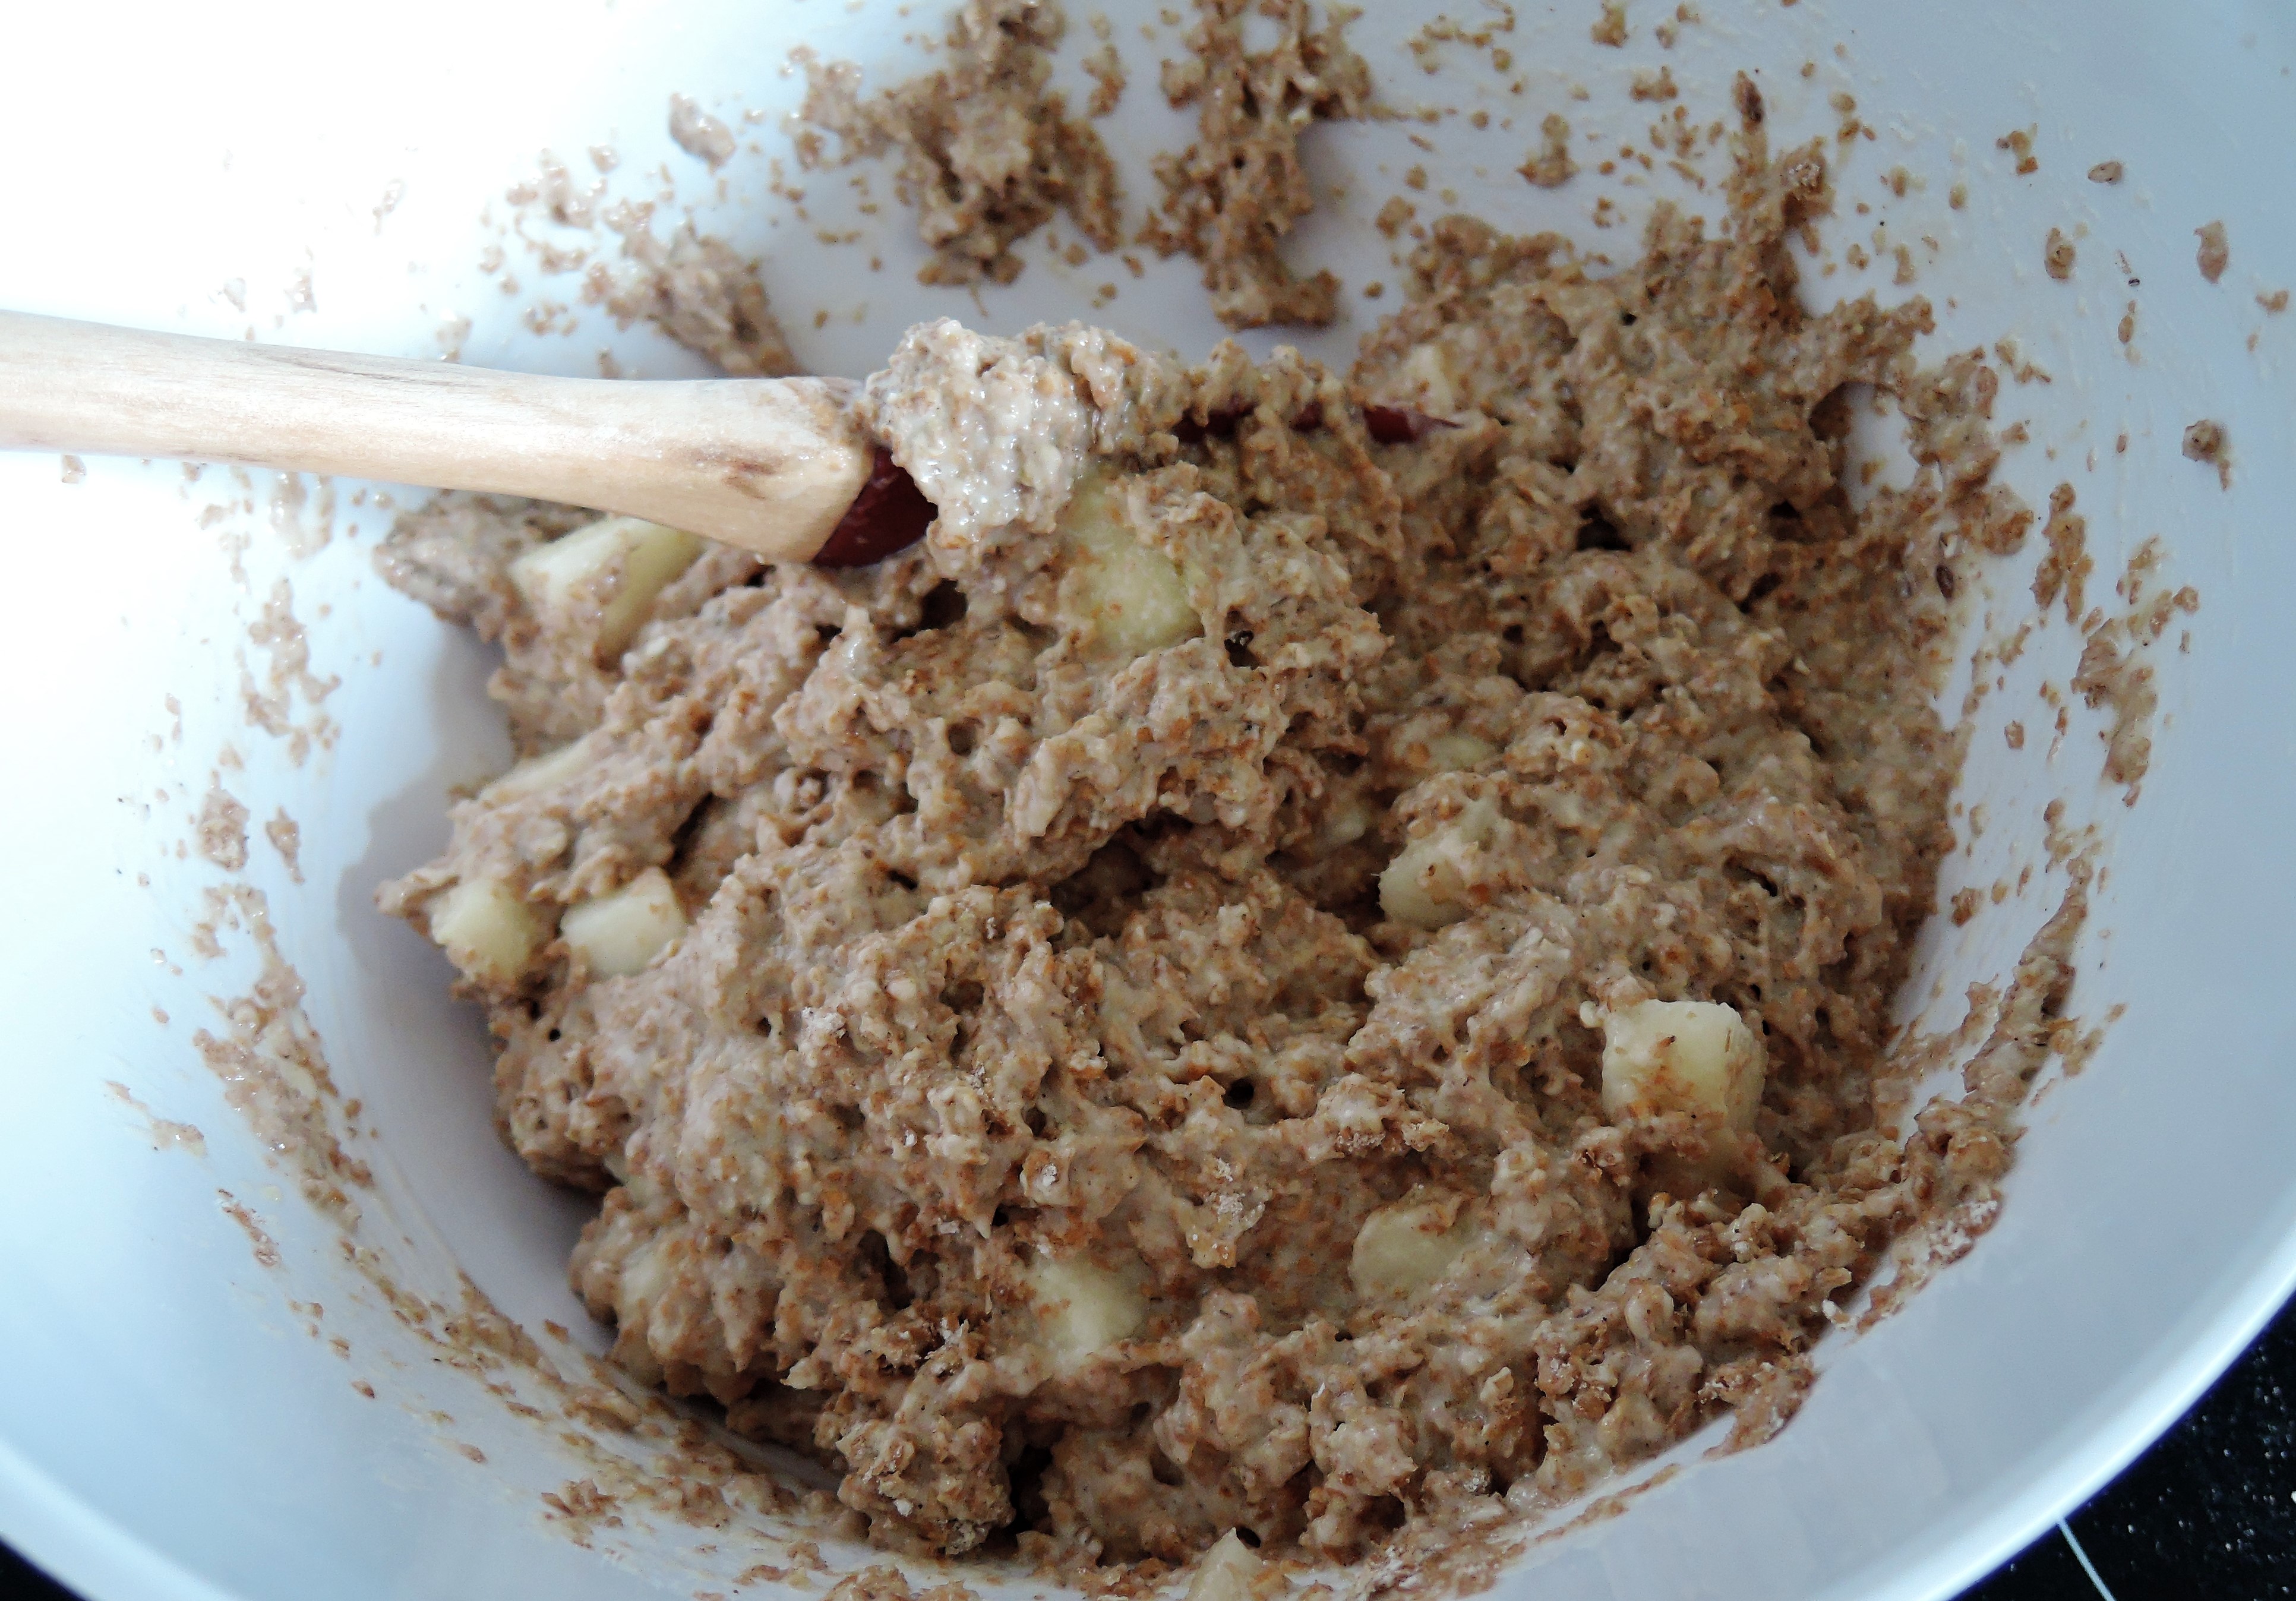 Spiced Pear and Bran Muffins mixture